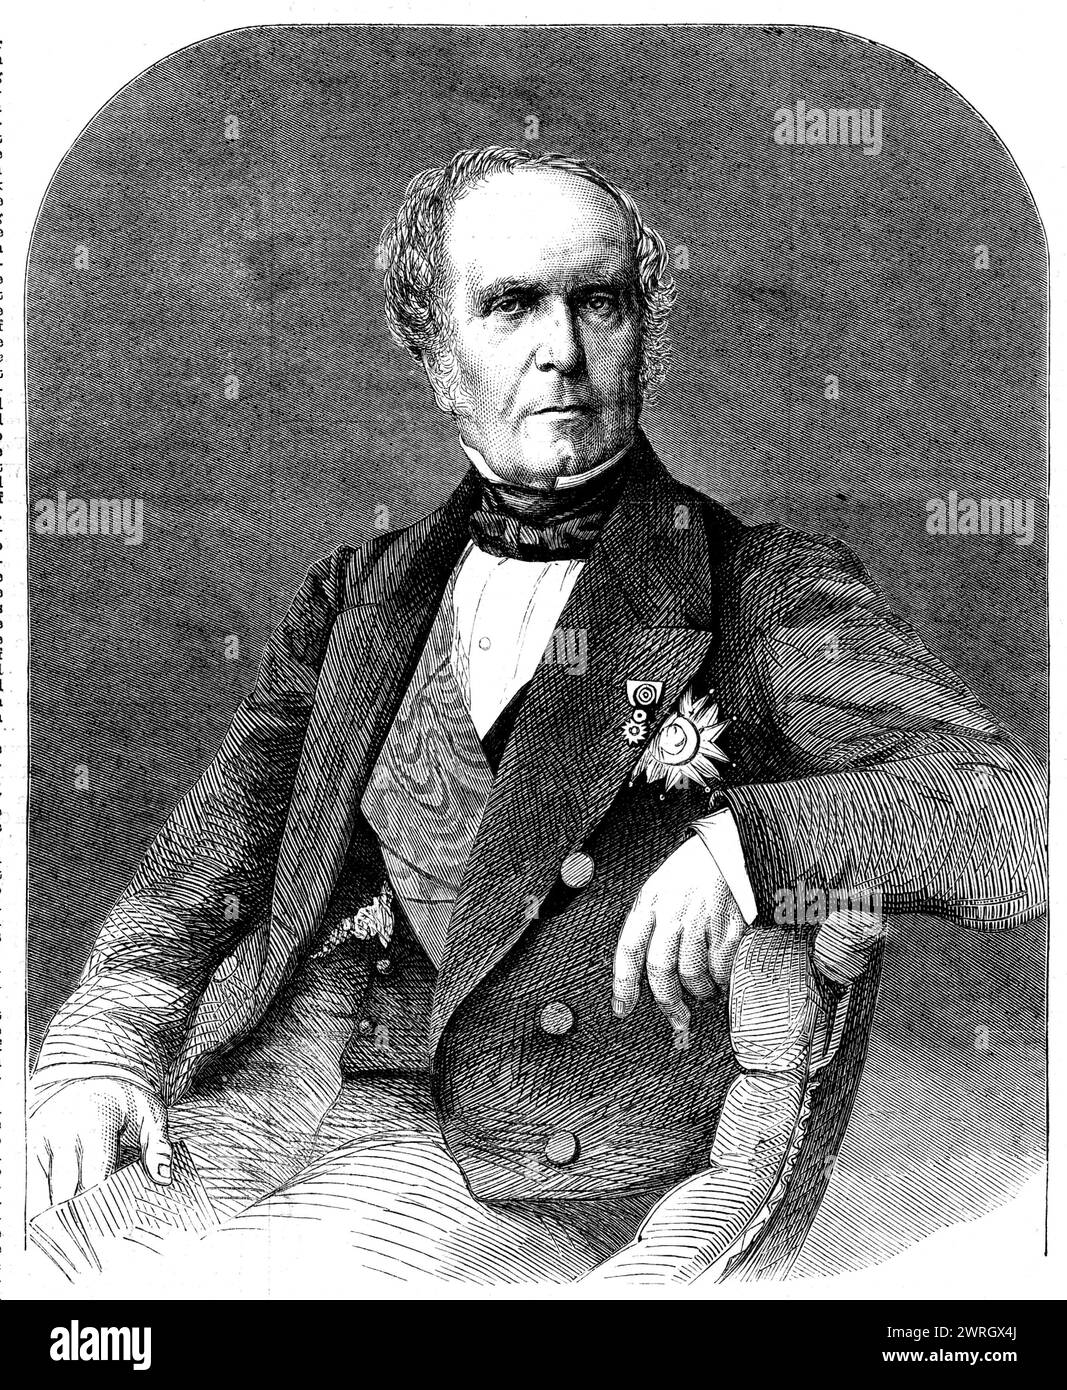 Baron Gros, the newly-appointed French Ambassador at the Court of St. James's, 1862. Engraving of a photograph by M. Alophe, photographer to the Emperor. In 1857, Baron Gros '...was sent to China...[as] Ambassador Extraordinary. There he cordially and most effectively supported Lord Elgin in the capture of Canton by the Allies, and governed that town for some time in concert with his Lordship. The single point of disagreement...was as to the policy of burning the Emperor of China's Summer Palace, to which the Baron was strongly opposed. In 1858, he signed, with the authorities of the Celestial Stock Photo